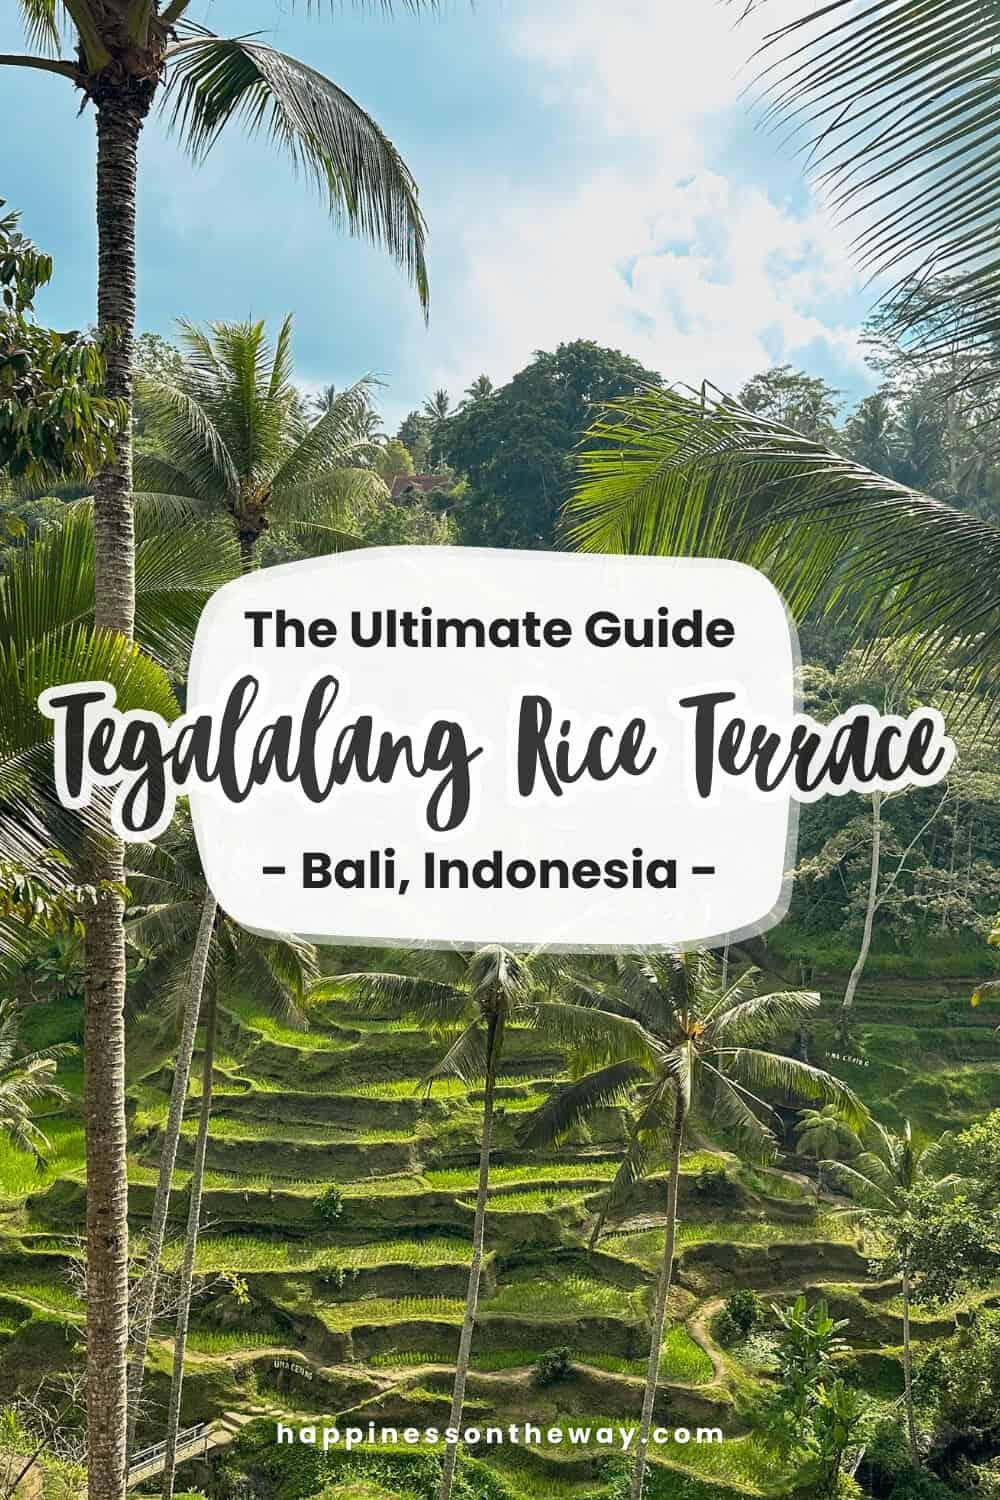 The Ultimate Guide Tegalalang Rice Terrace Bali Indonesia